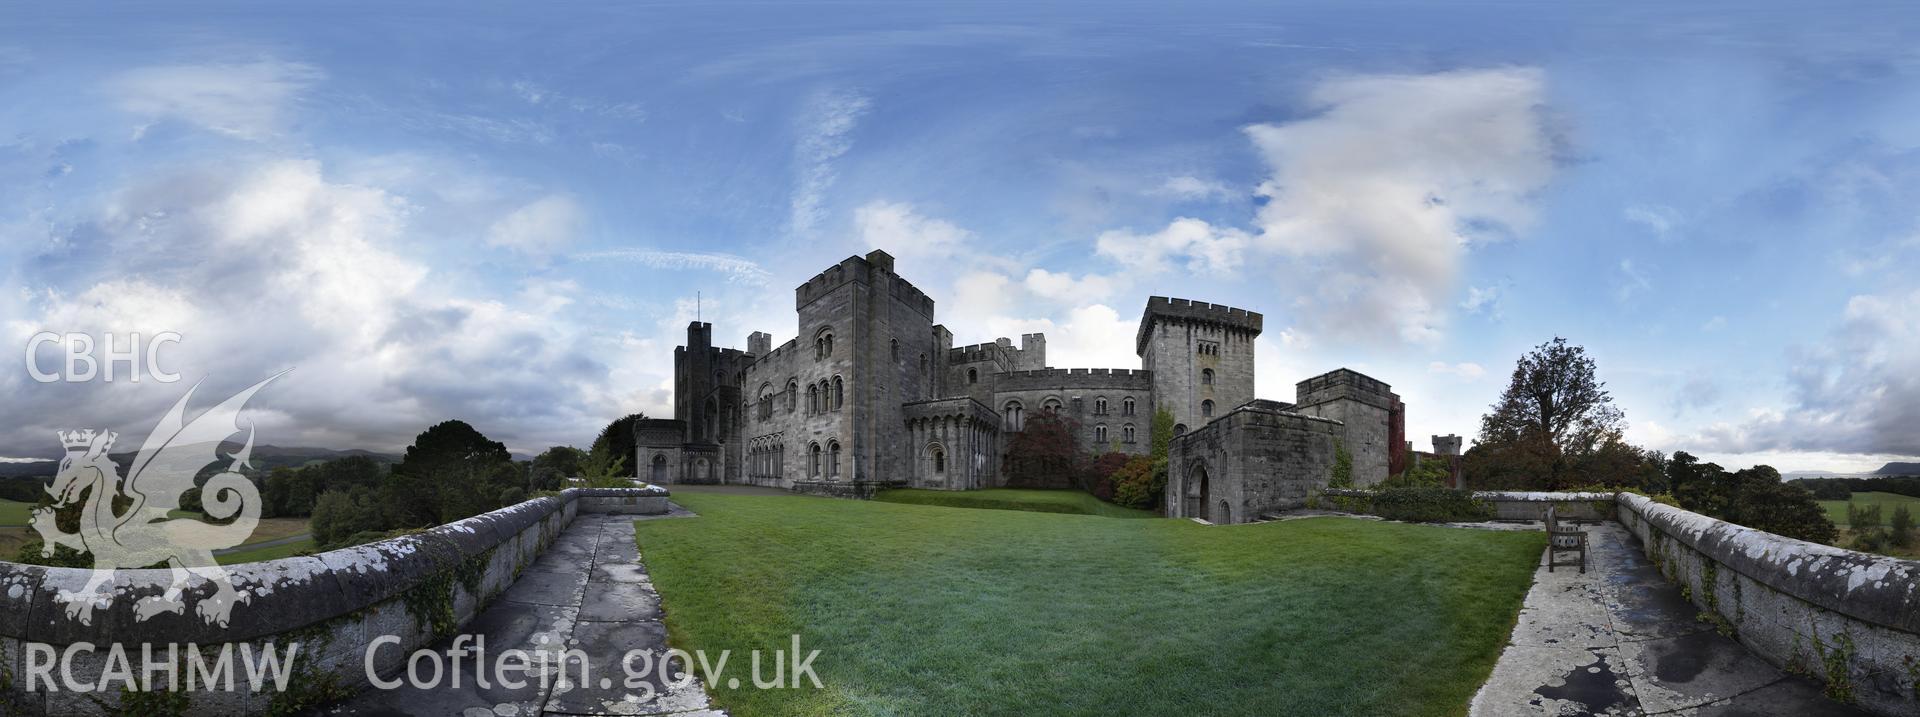 Reduced resolution Tiff of stitched images at the entrance to Penrhyn Castle produced by Susan Fielding and Rita Singer, October 2017. Produced through European Travellers to Wales project.